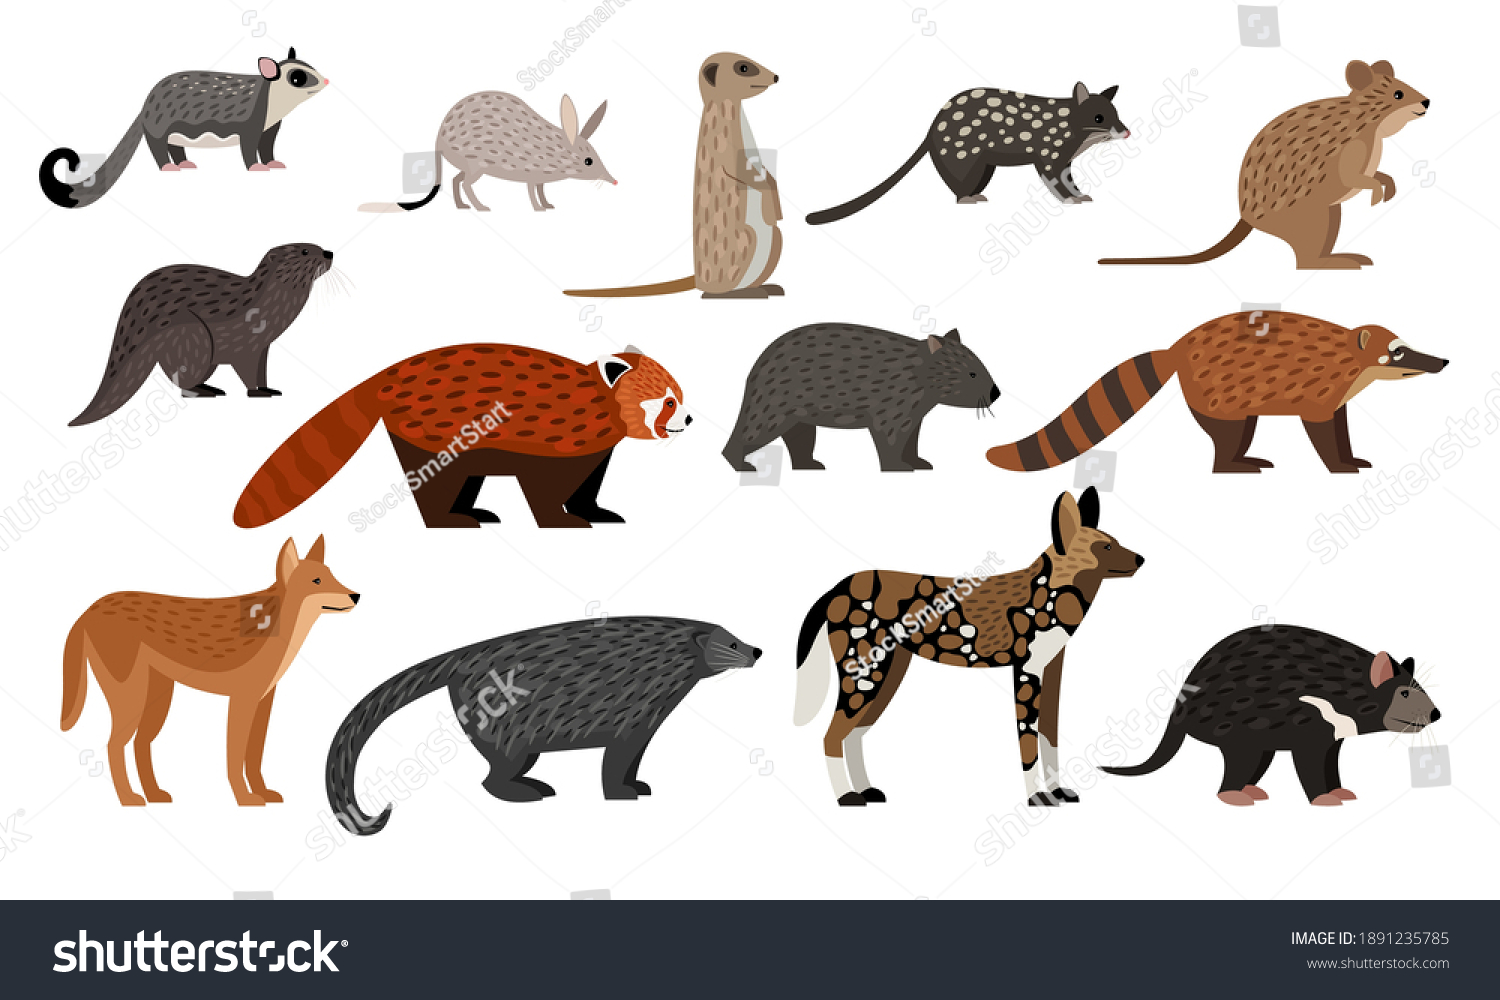 SVG of African animals set. Cartoon sugar glider, bilby quoll quokka otter red panda binturong coati dingo zoo creatures, wildlife characters collection isolated svg